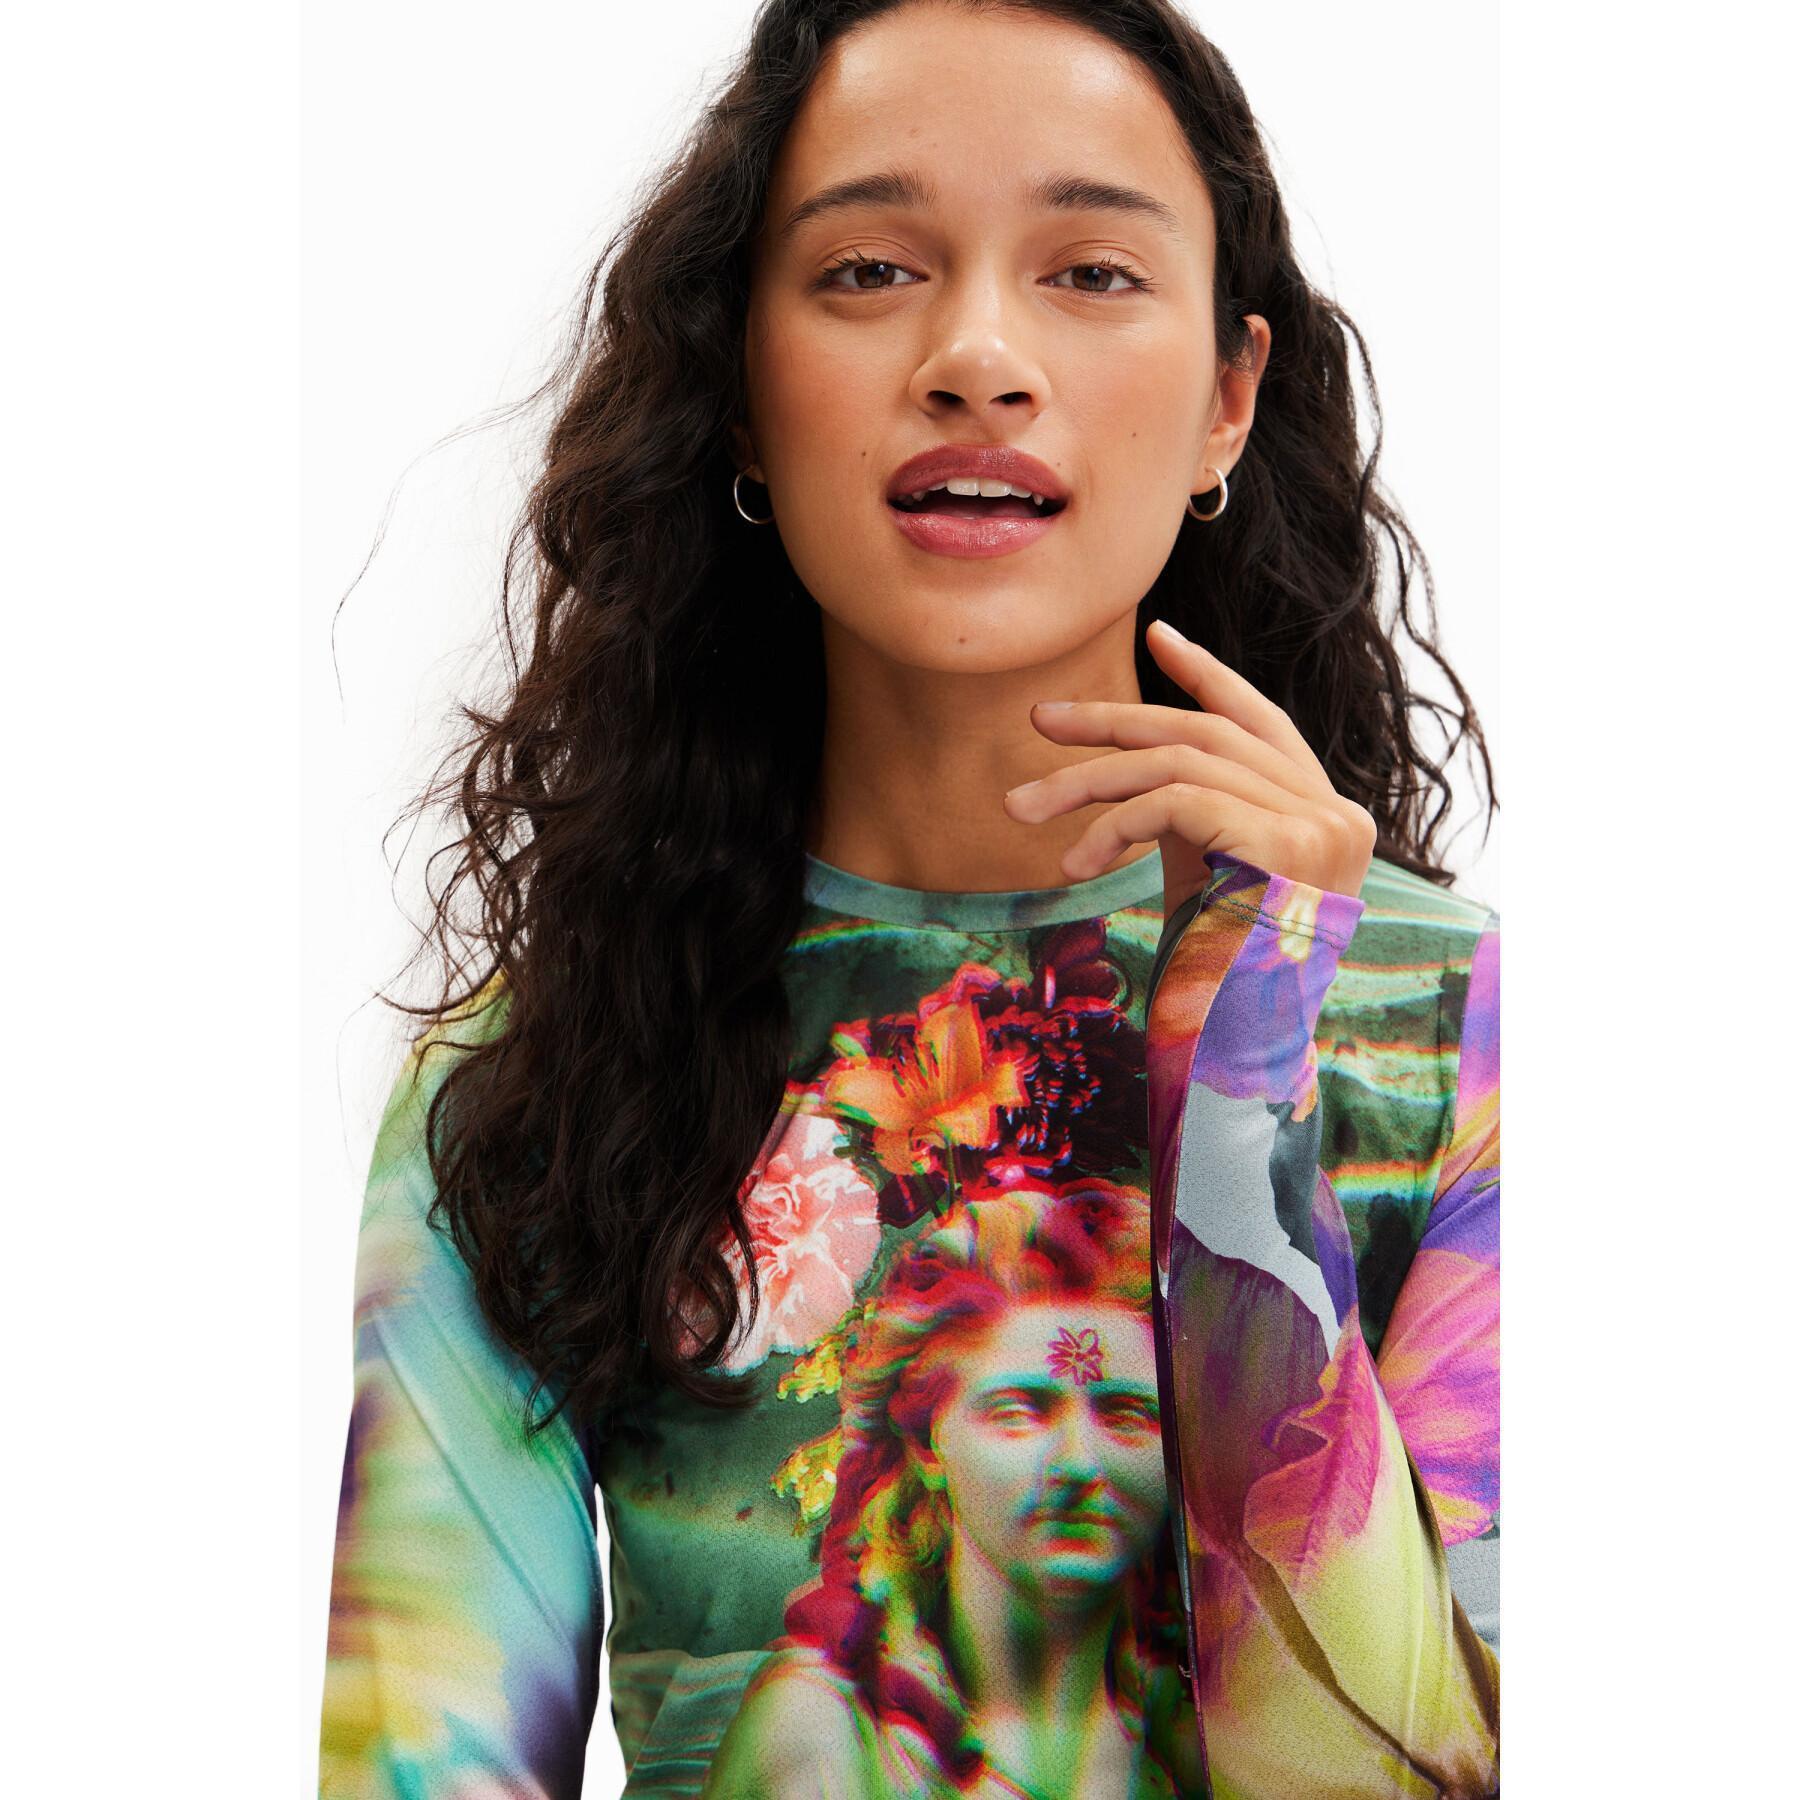 Women's long-sleeved t-shirt with fancy bust Desigual